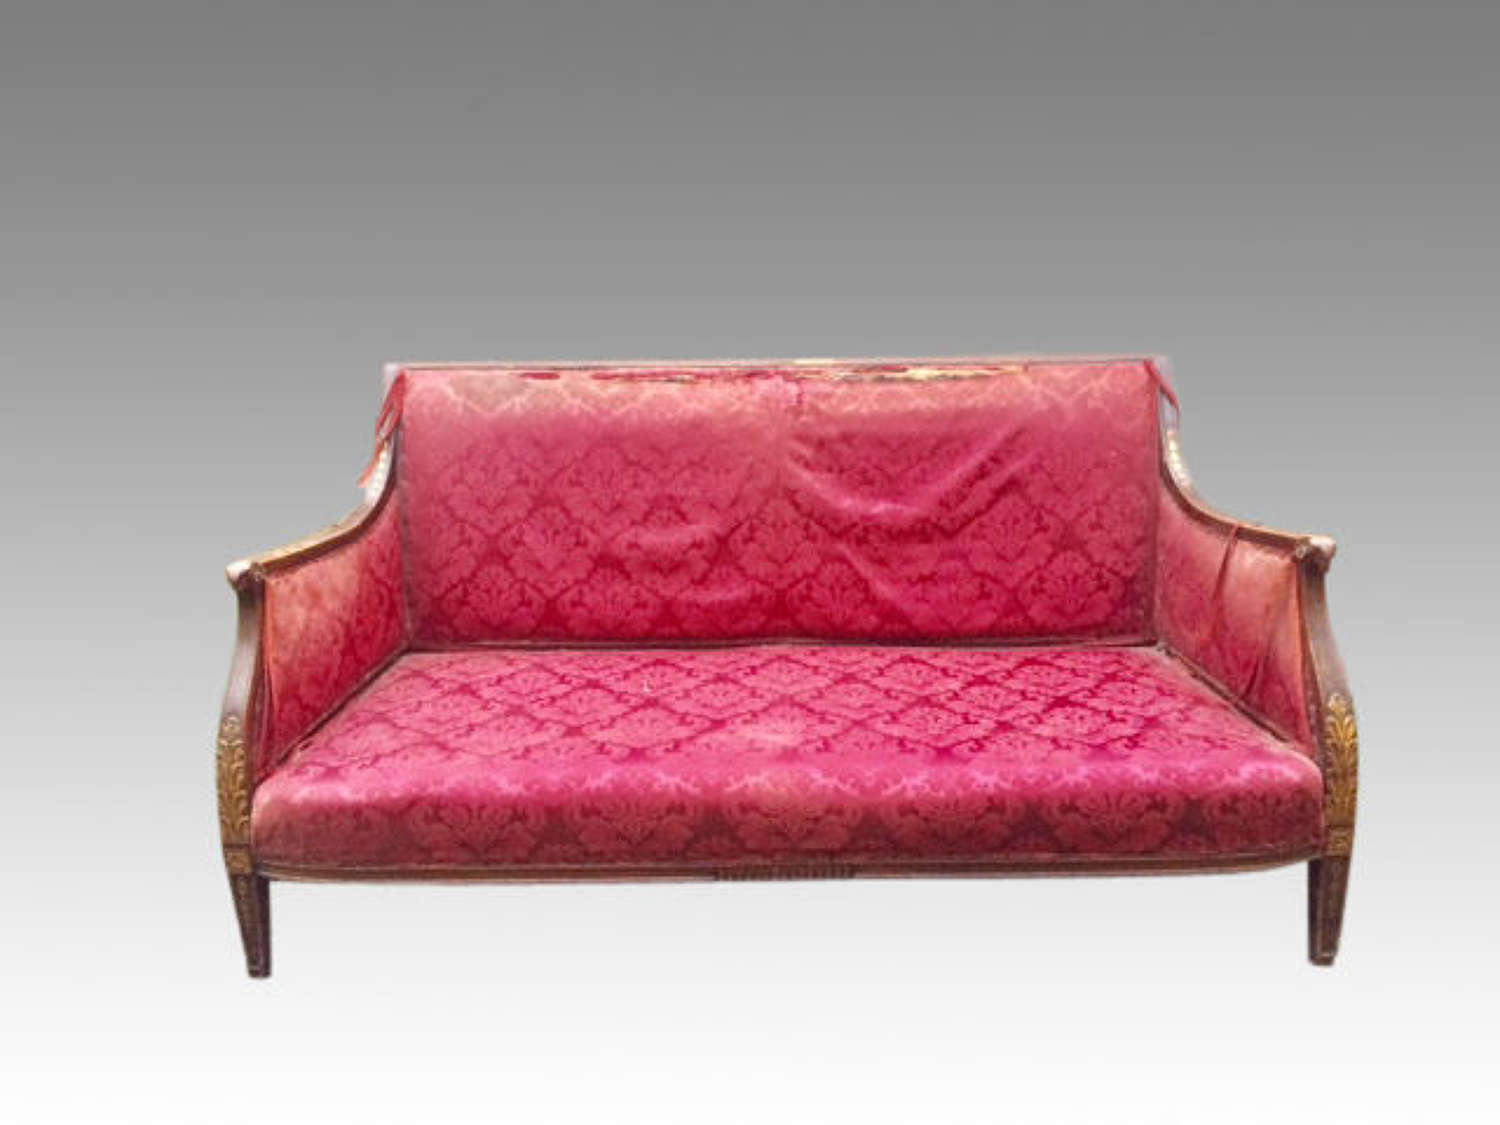 A decorative 19th century carved mahogany settee.